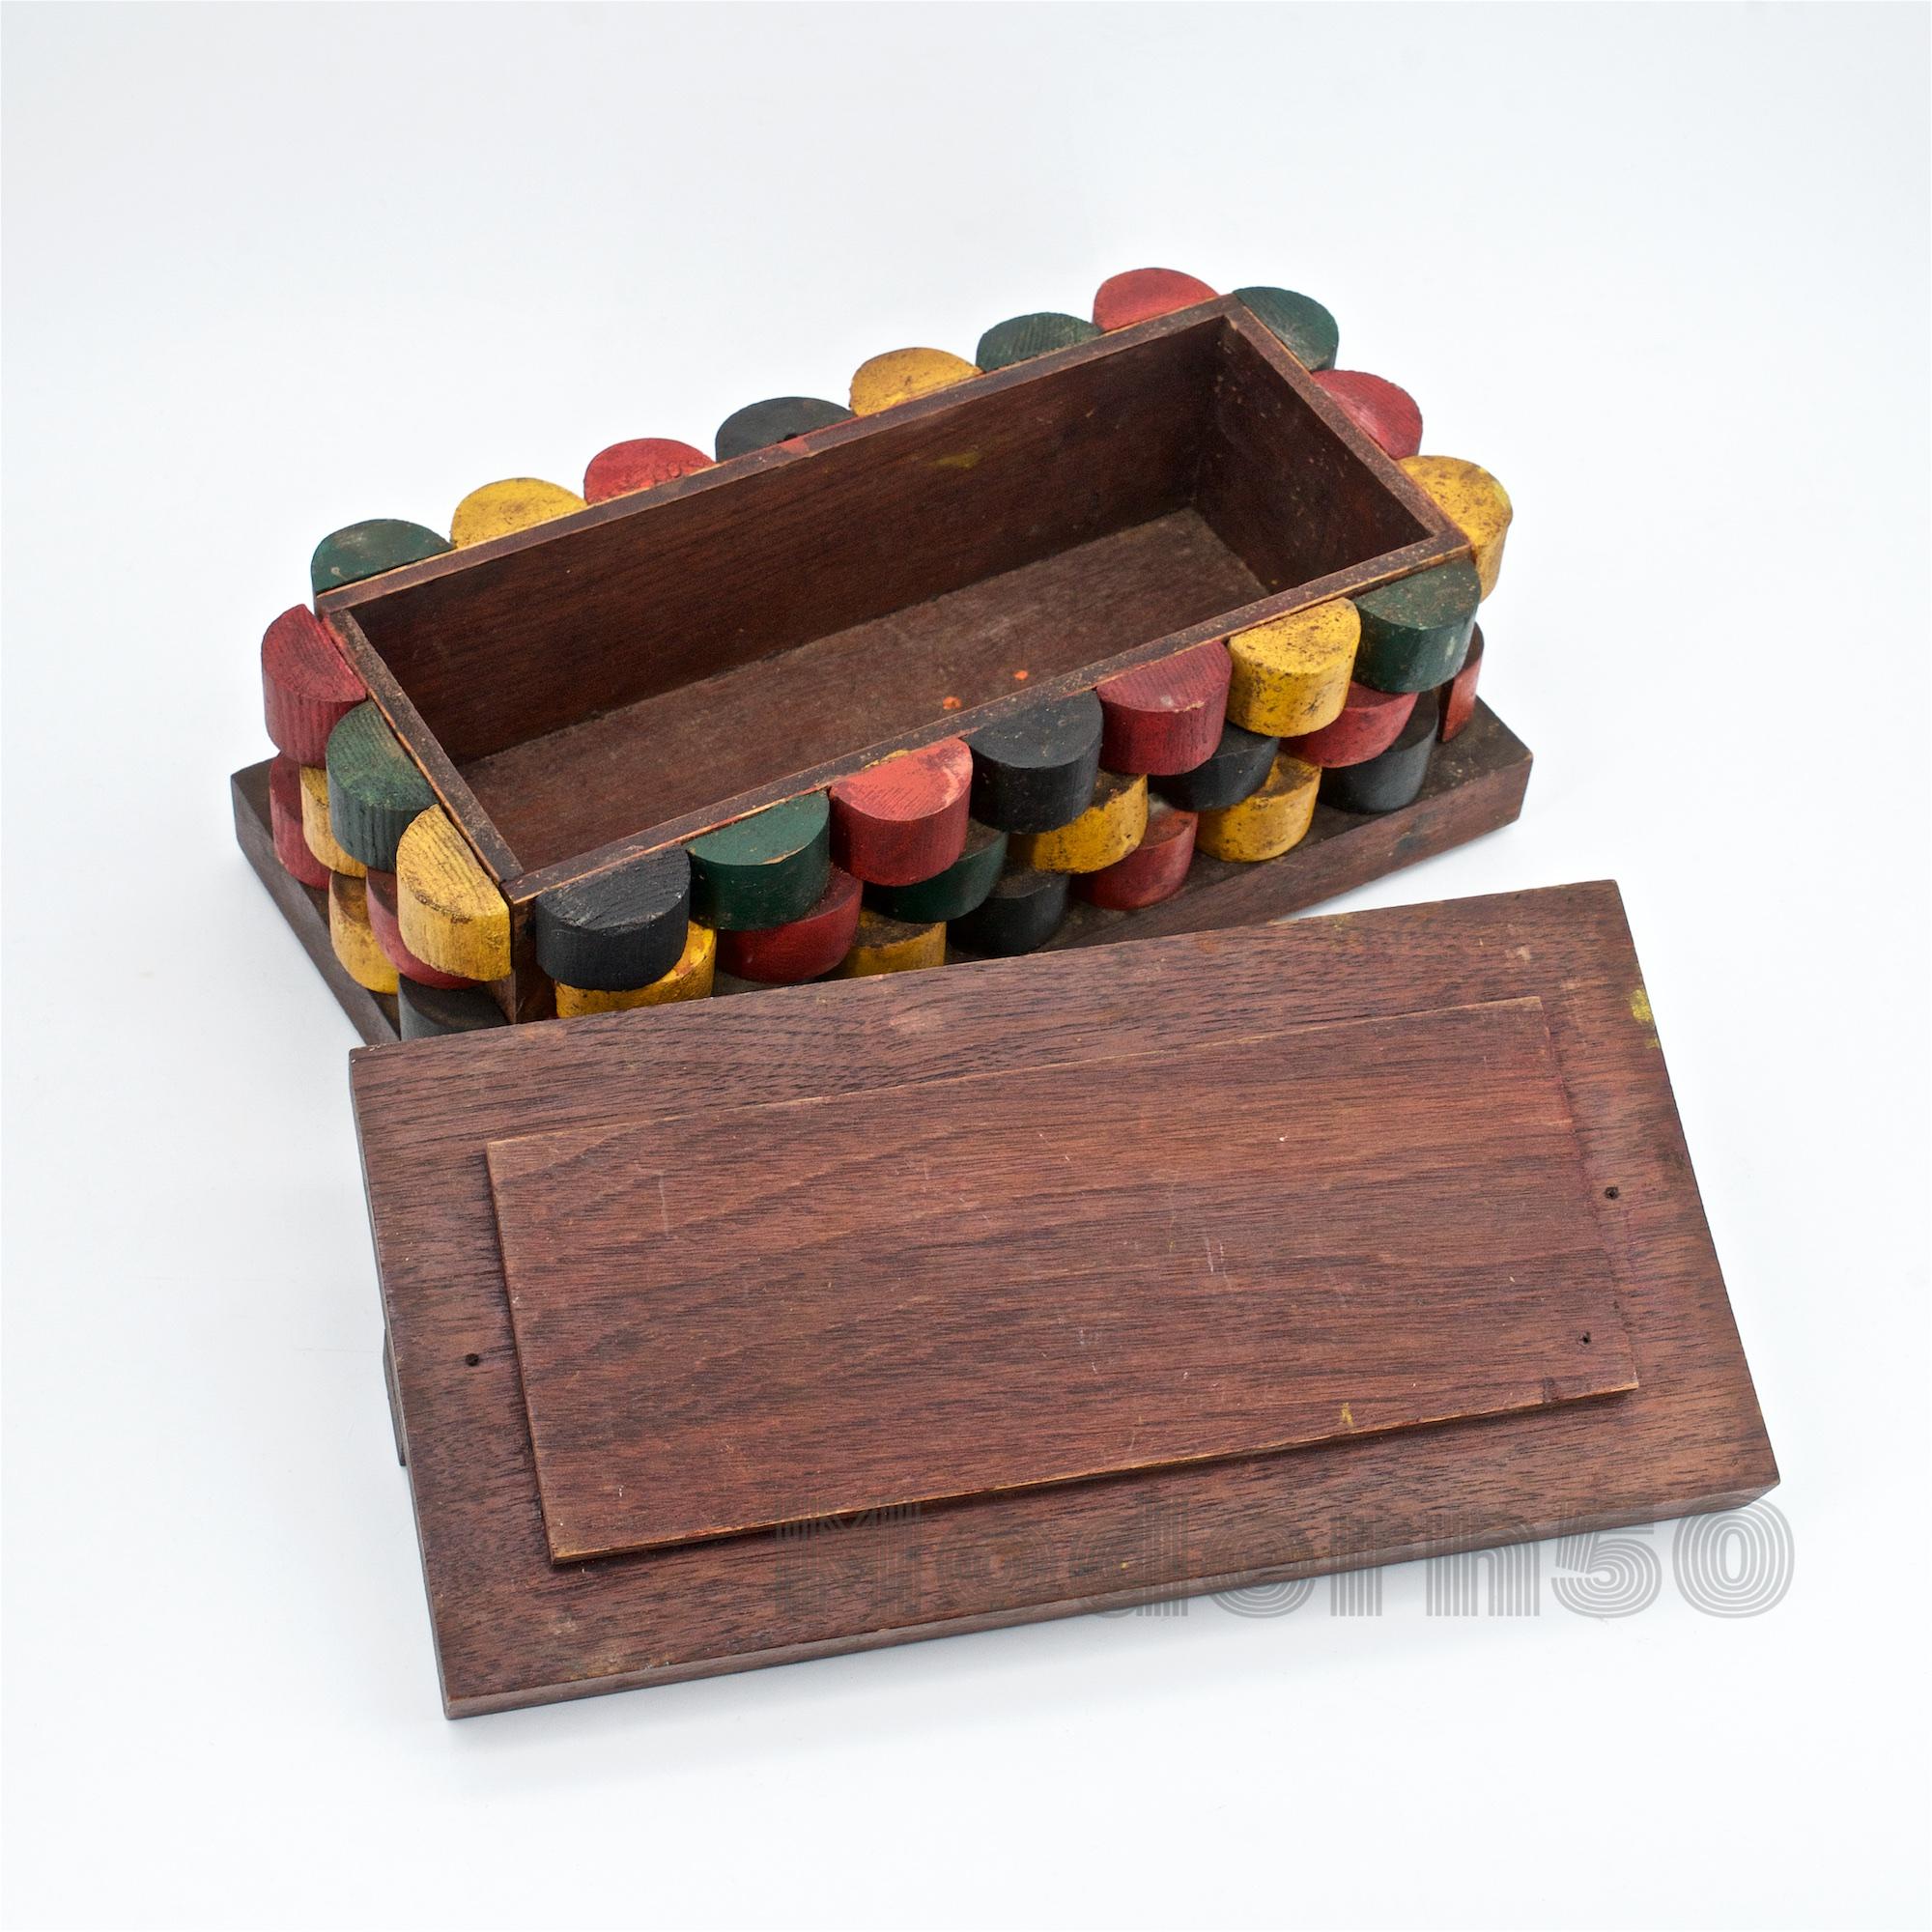 American 1950s Painted Wooden Jewelry Lidded Box Studio Craft Peter Blake Bauhaus Style  For Sale